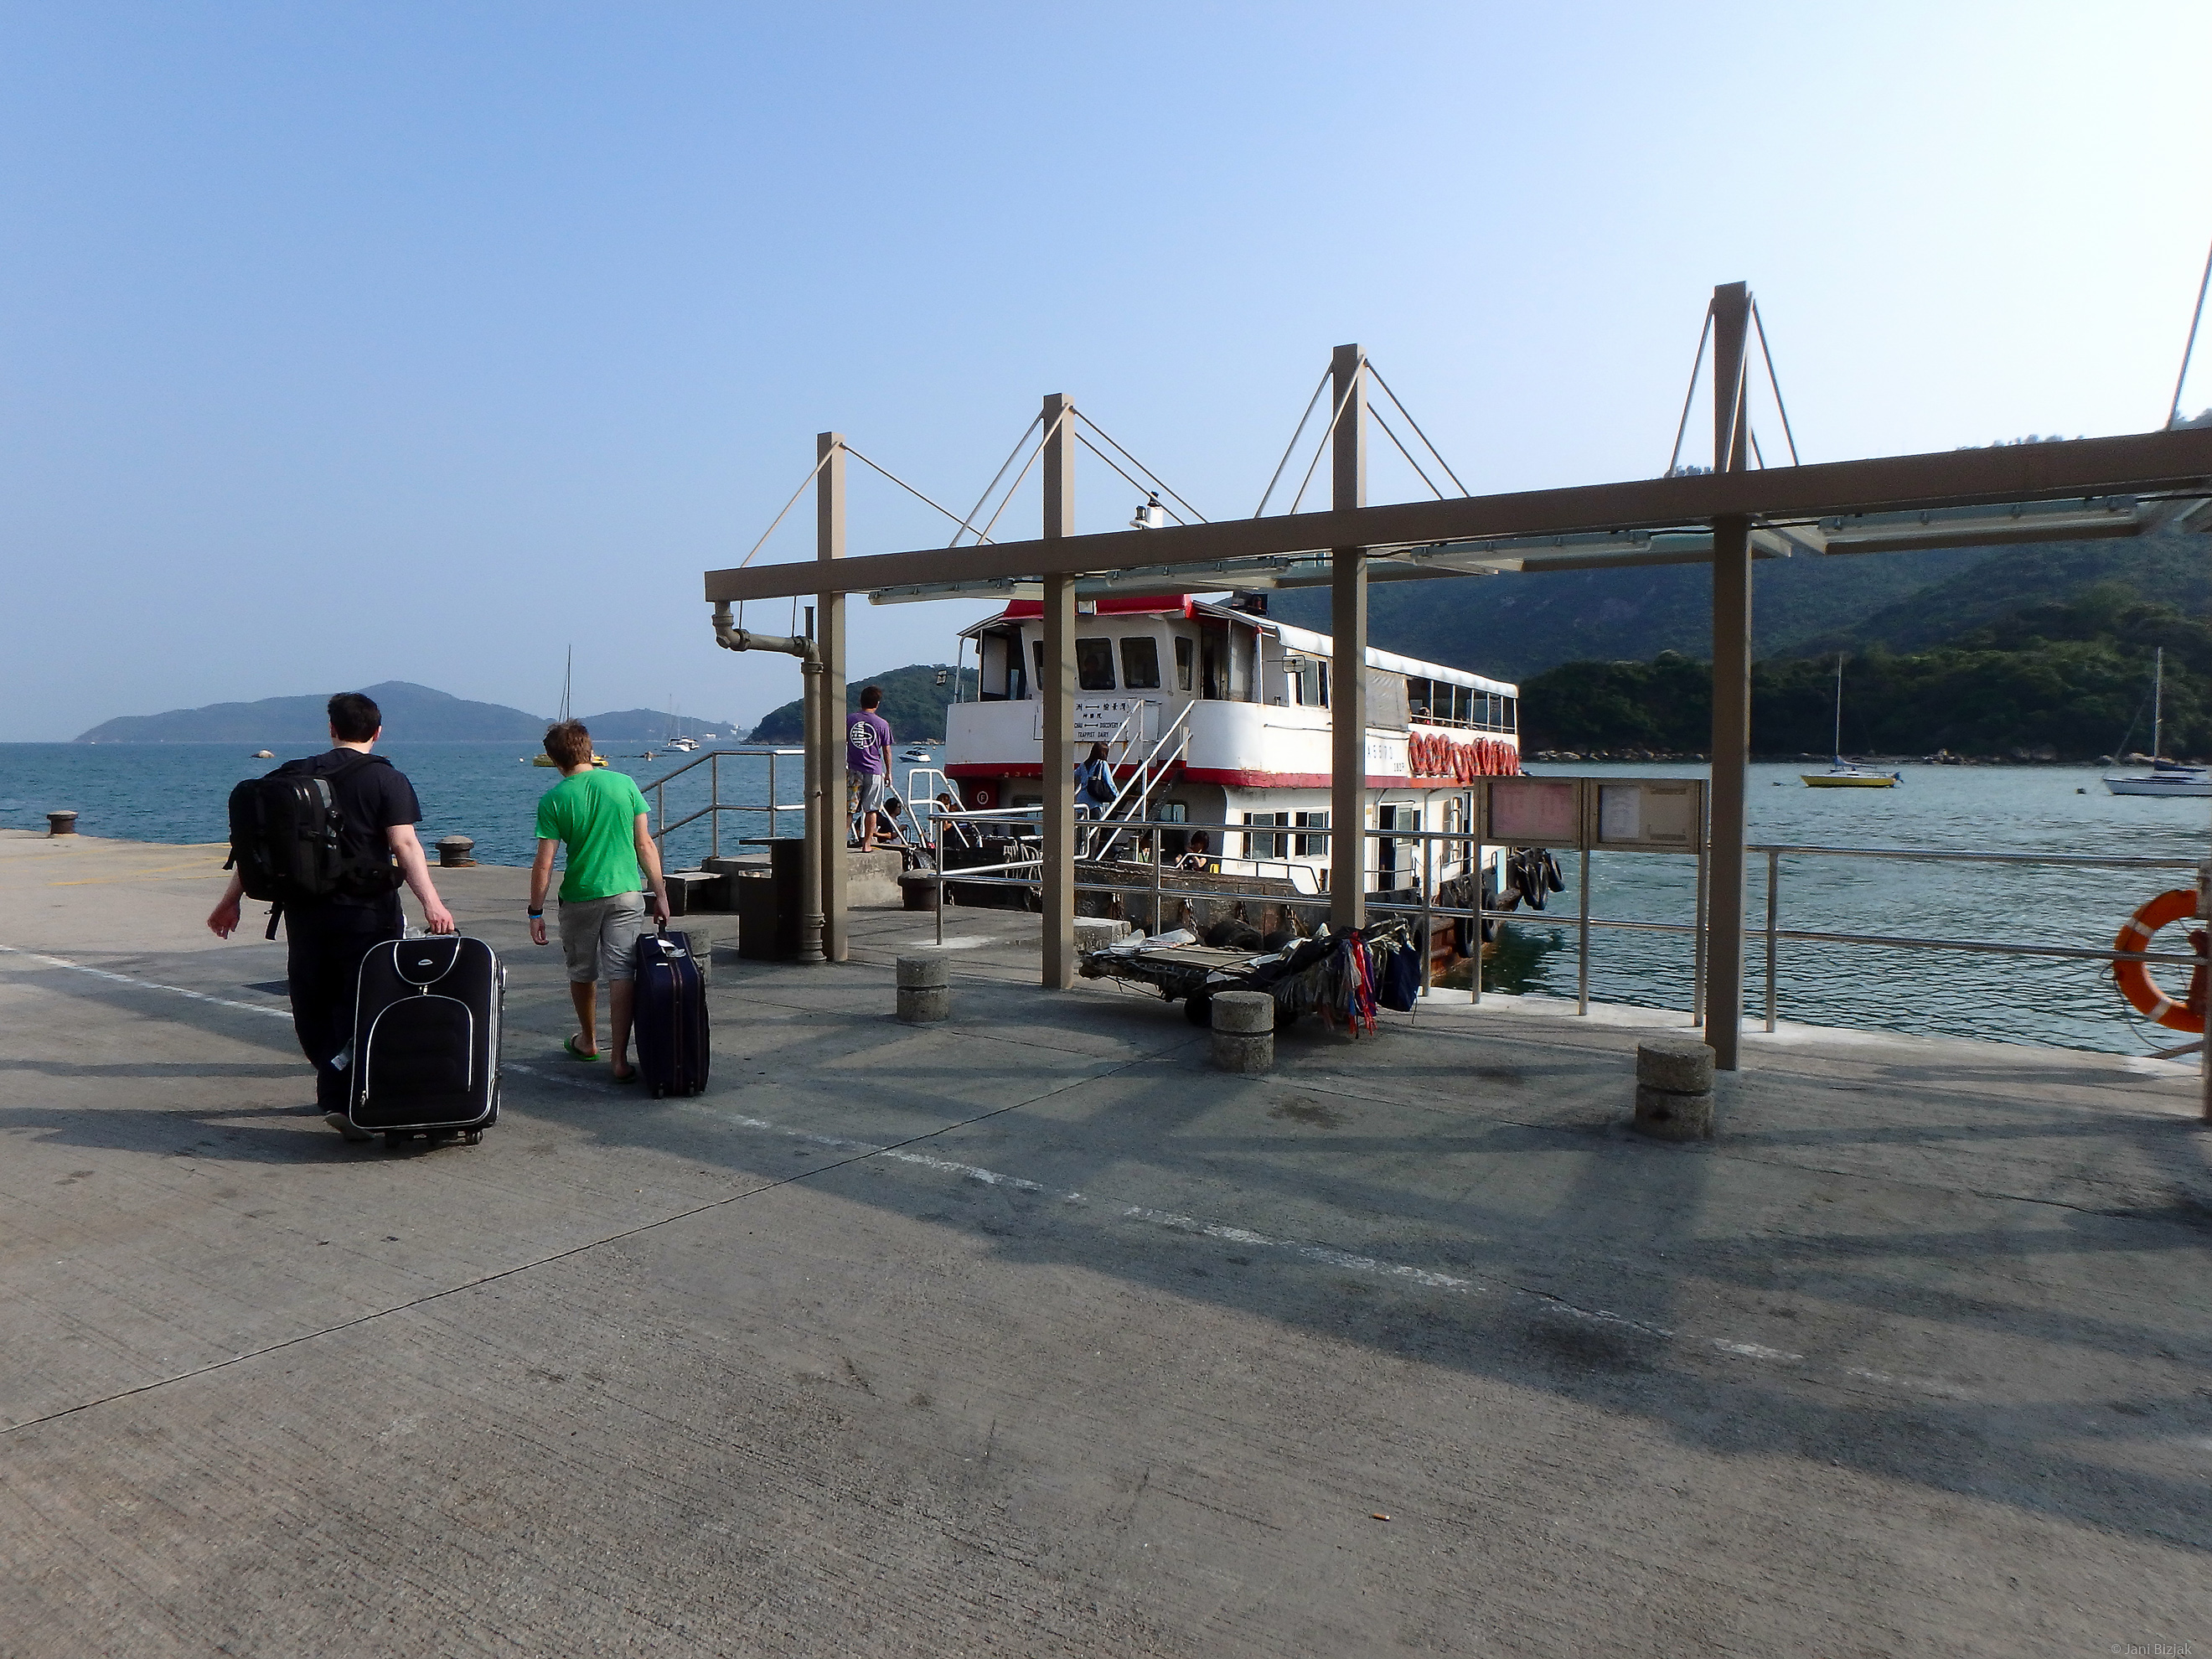 Boarding ferry - it's the only way to get to Jean's island.